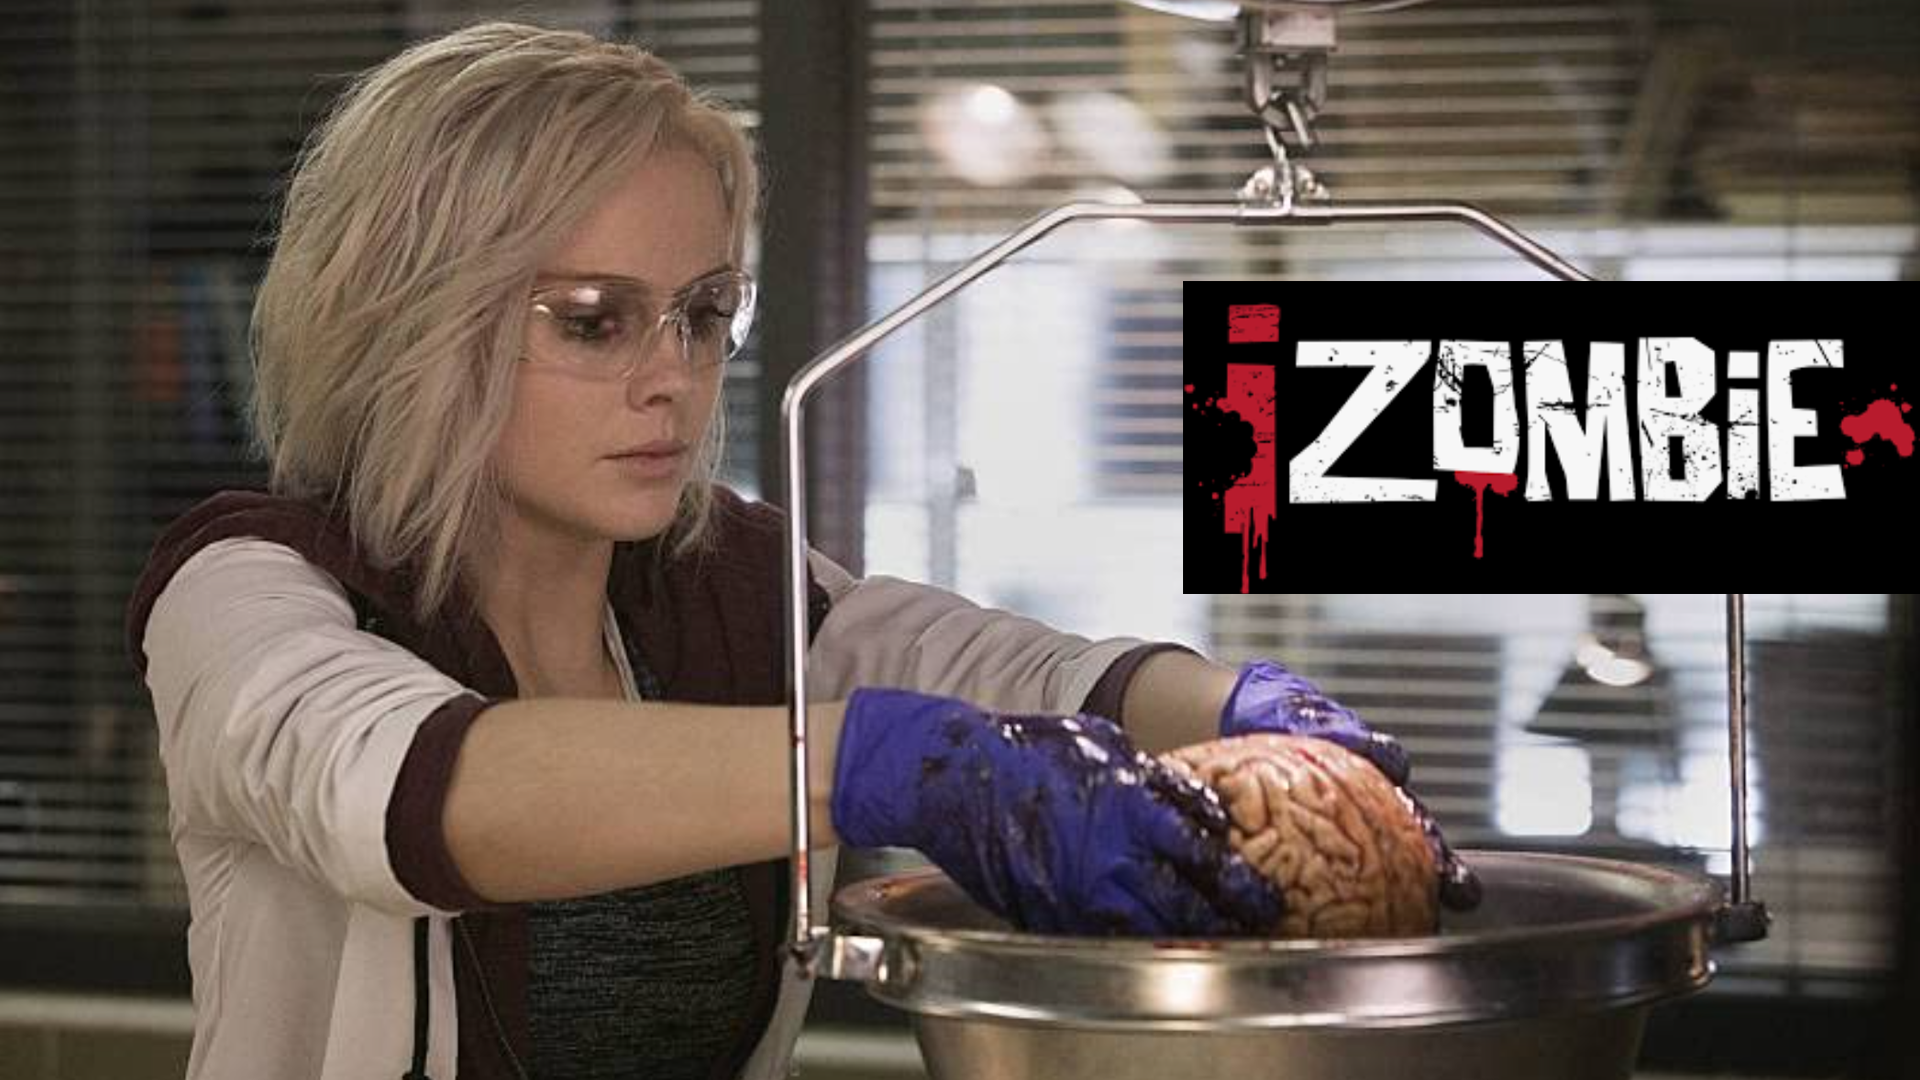 What We’re Watching: ‘iZombie’ Proves Zombies Can Contain Brains and Eat Them, Too